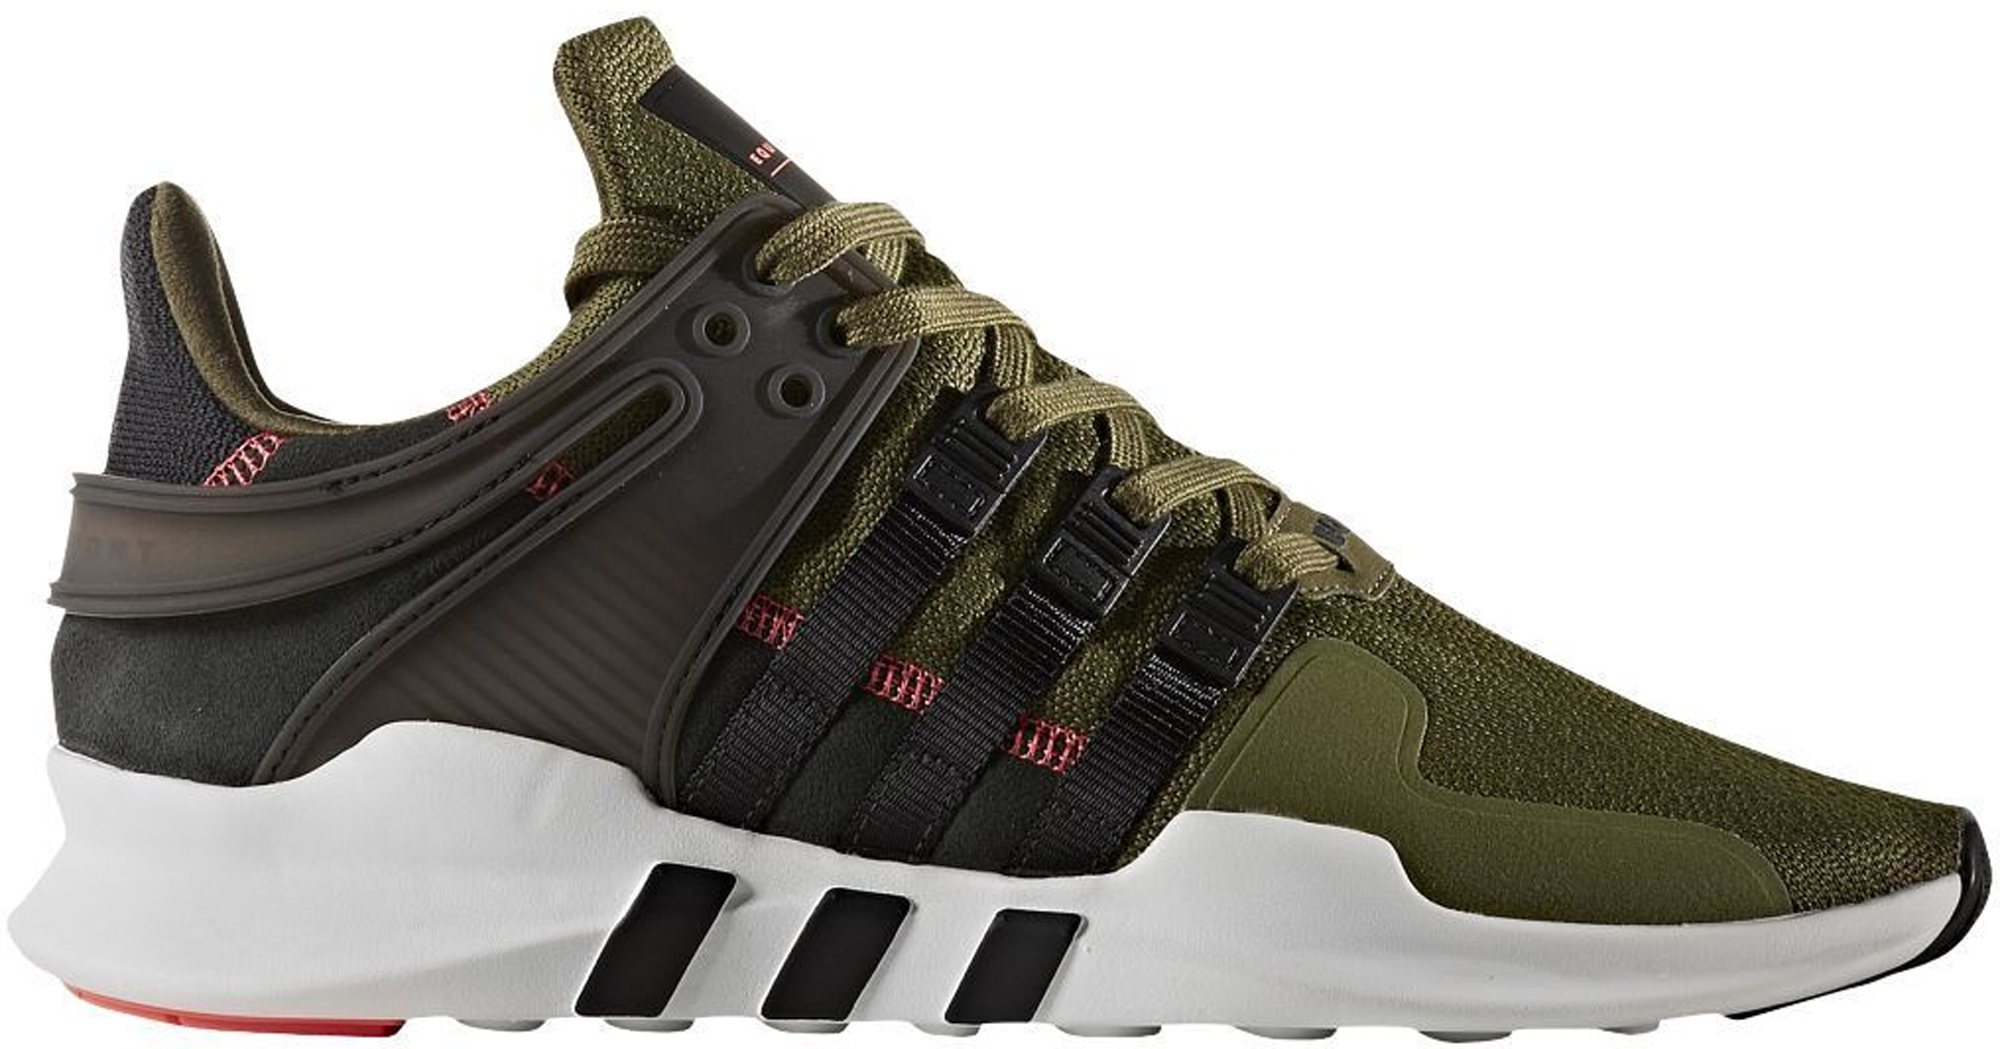 adidas EQT Support Adv Olive - S76961